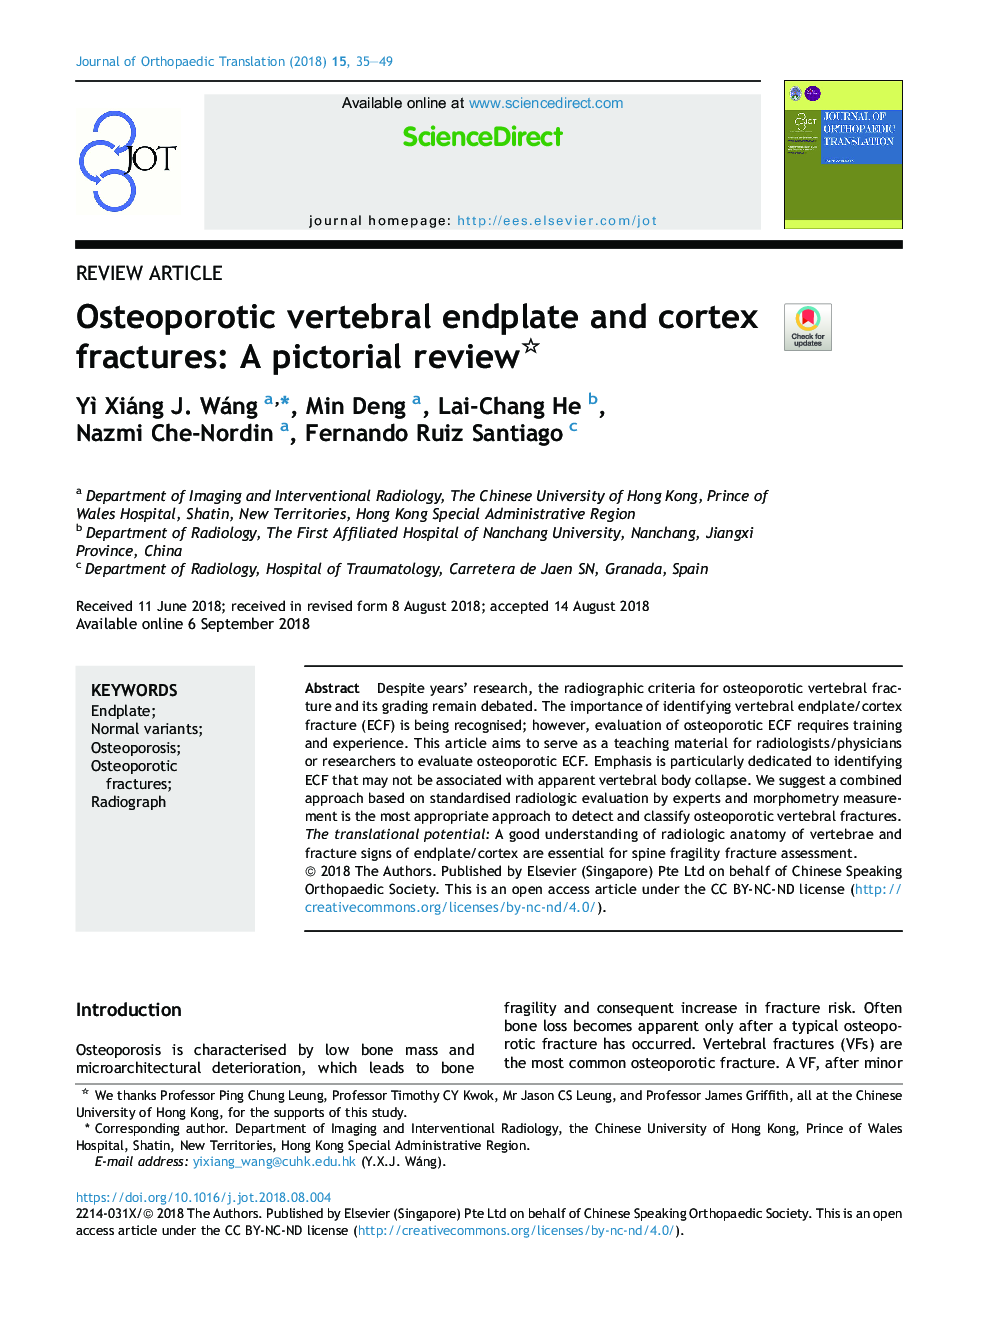 Osteoporotic vertebral endplate and cortex fractures: A pictorial review